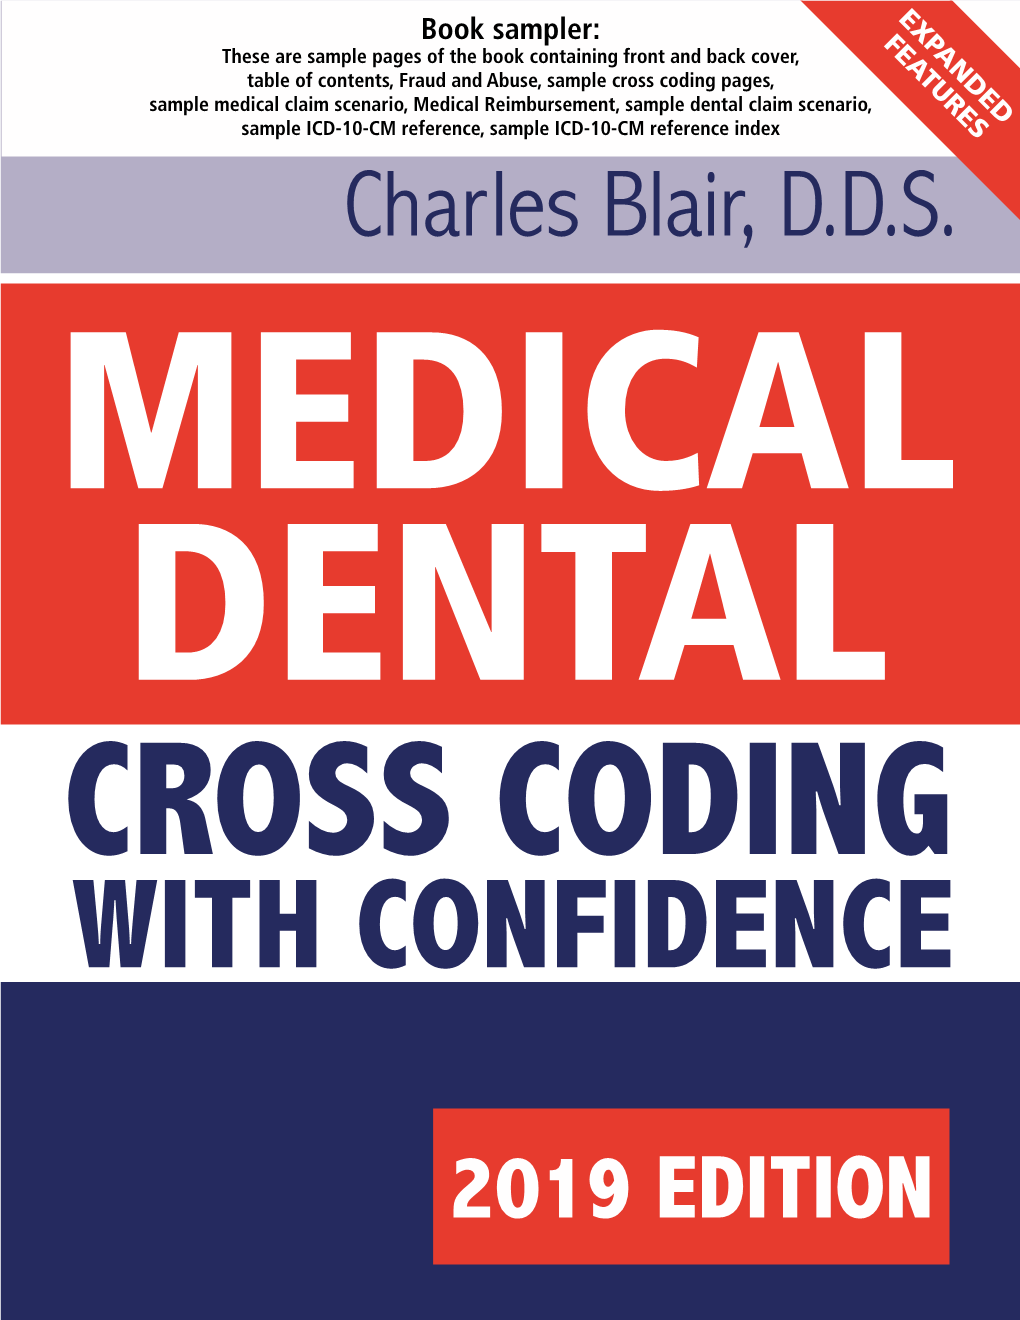 Charles Blair, D.D.S. MEDICAL DENTAL CROSS CODING with CONFIDENCE